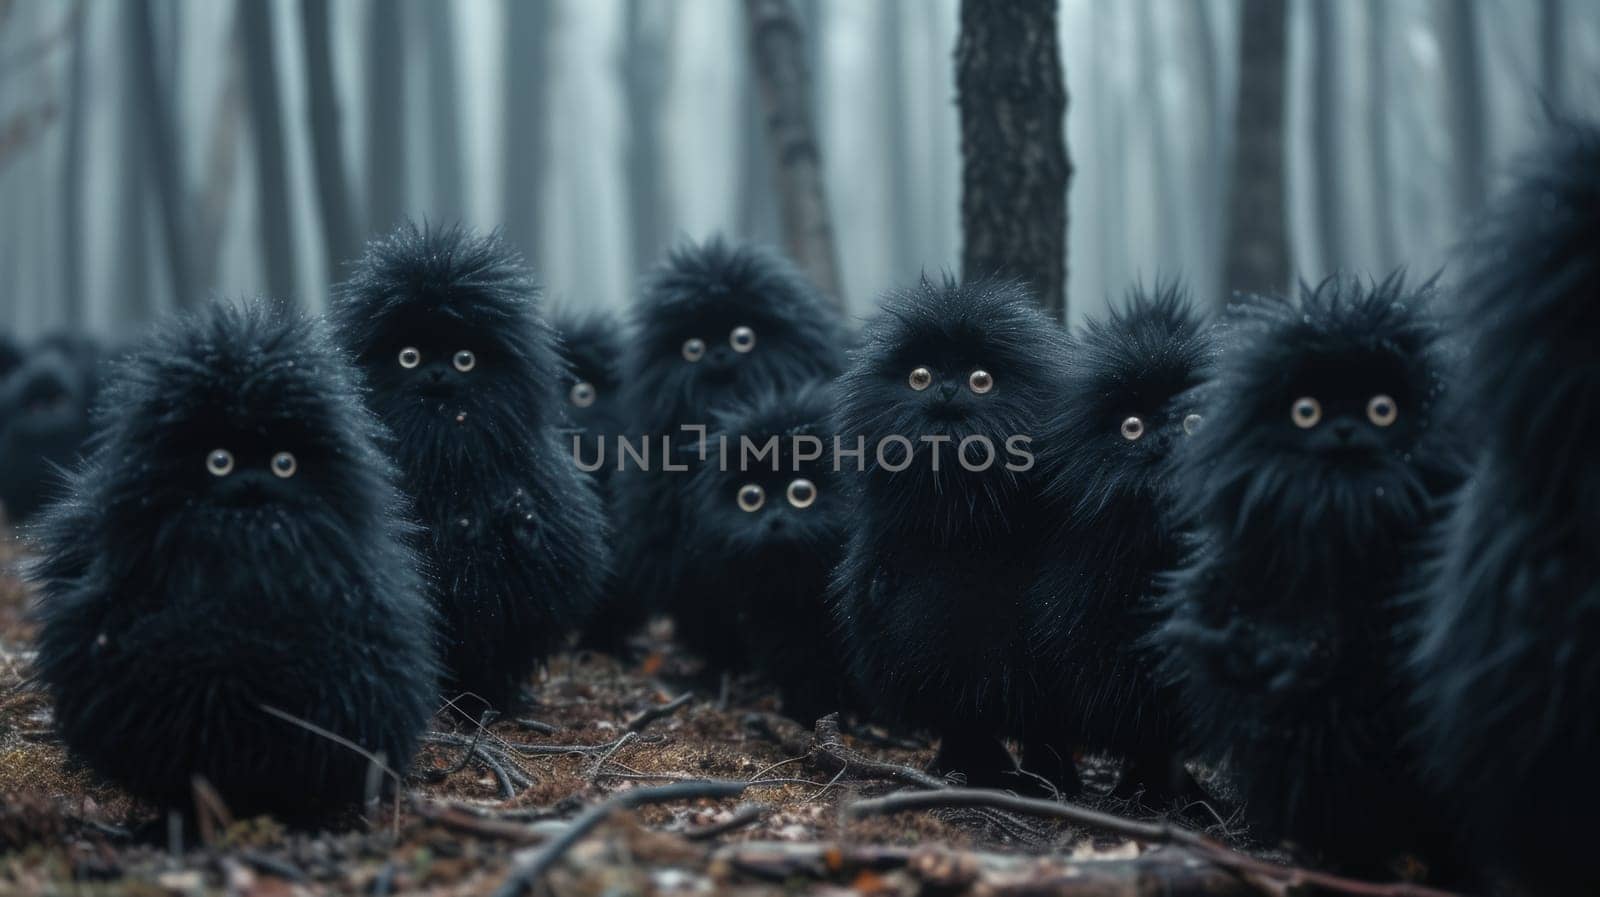 A group of black fuzzy creatures with big eyes standing in a forest